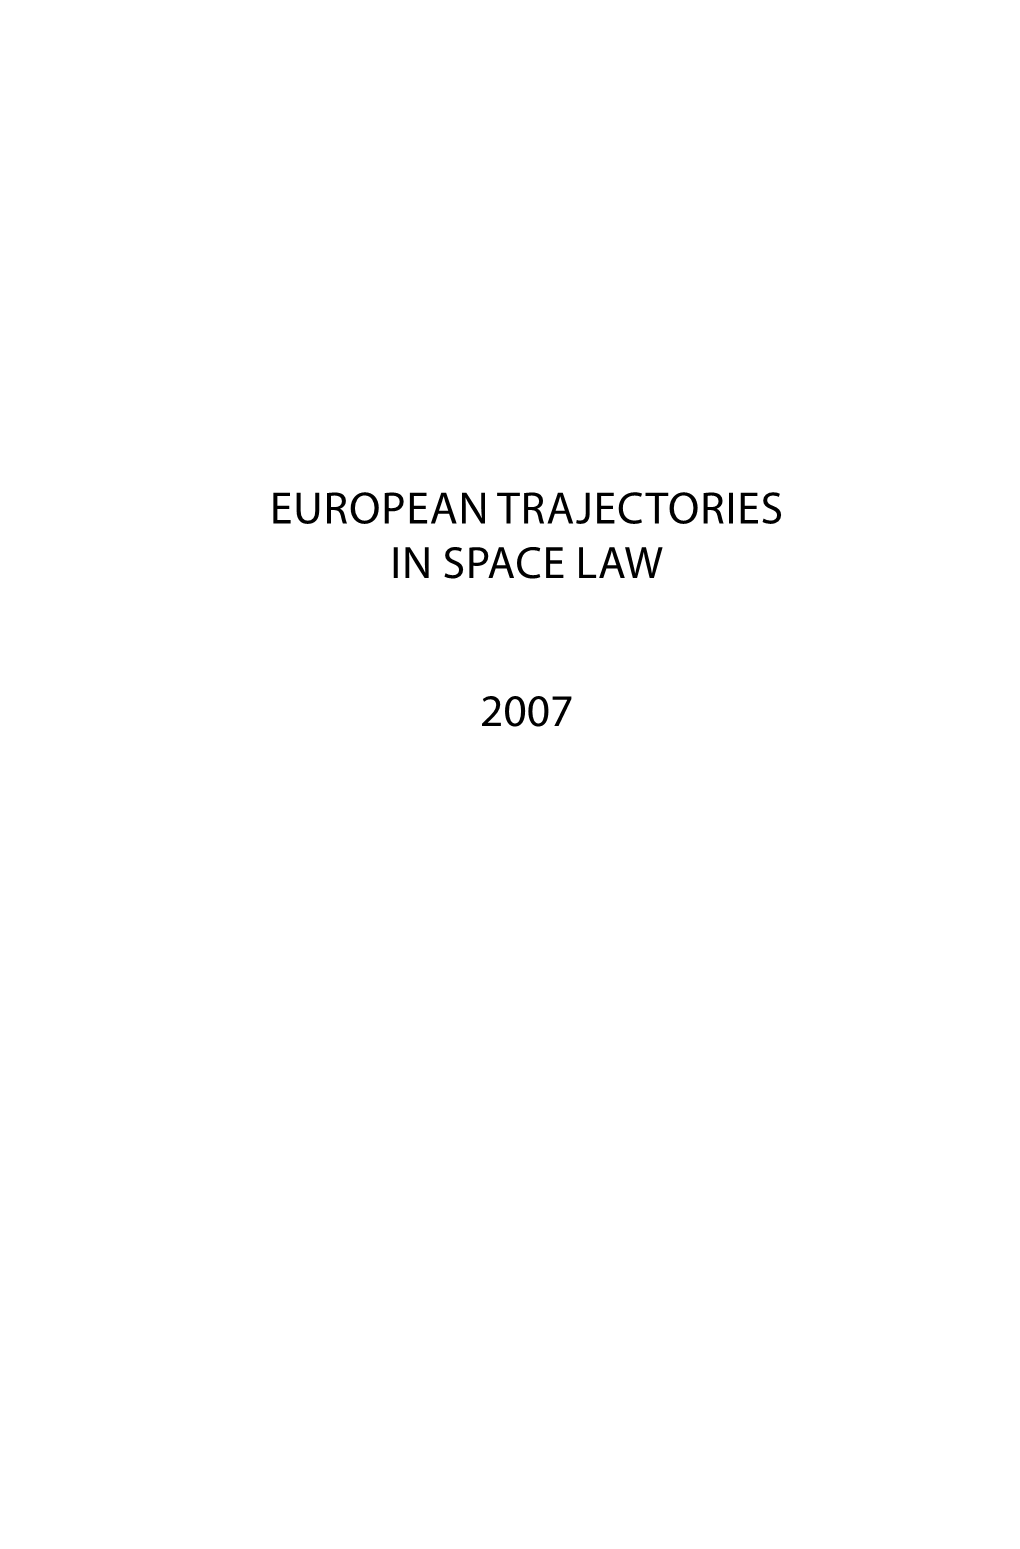 The Outer Space Treaty (Ost) in 1967